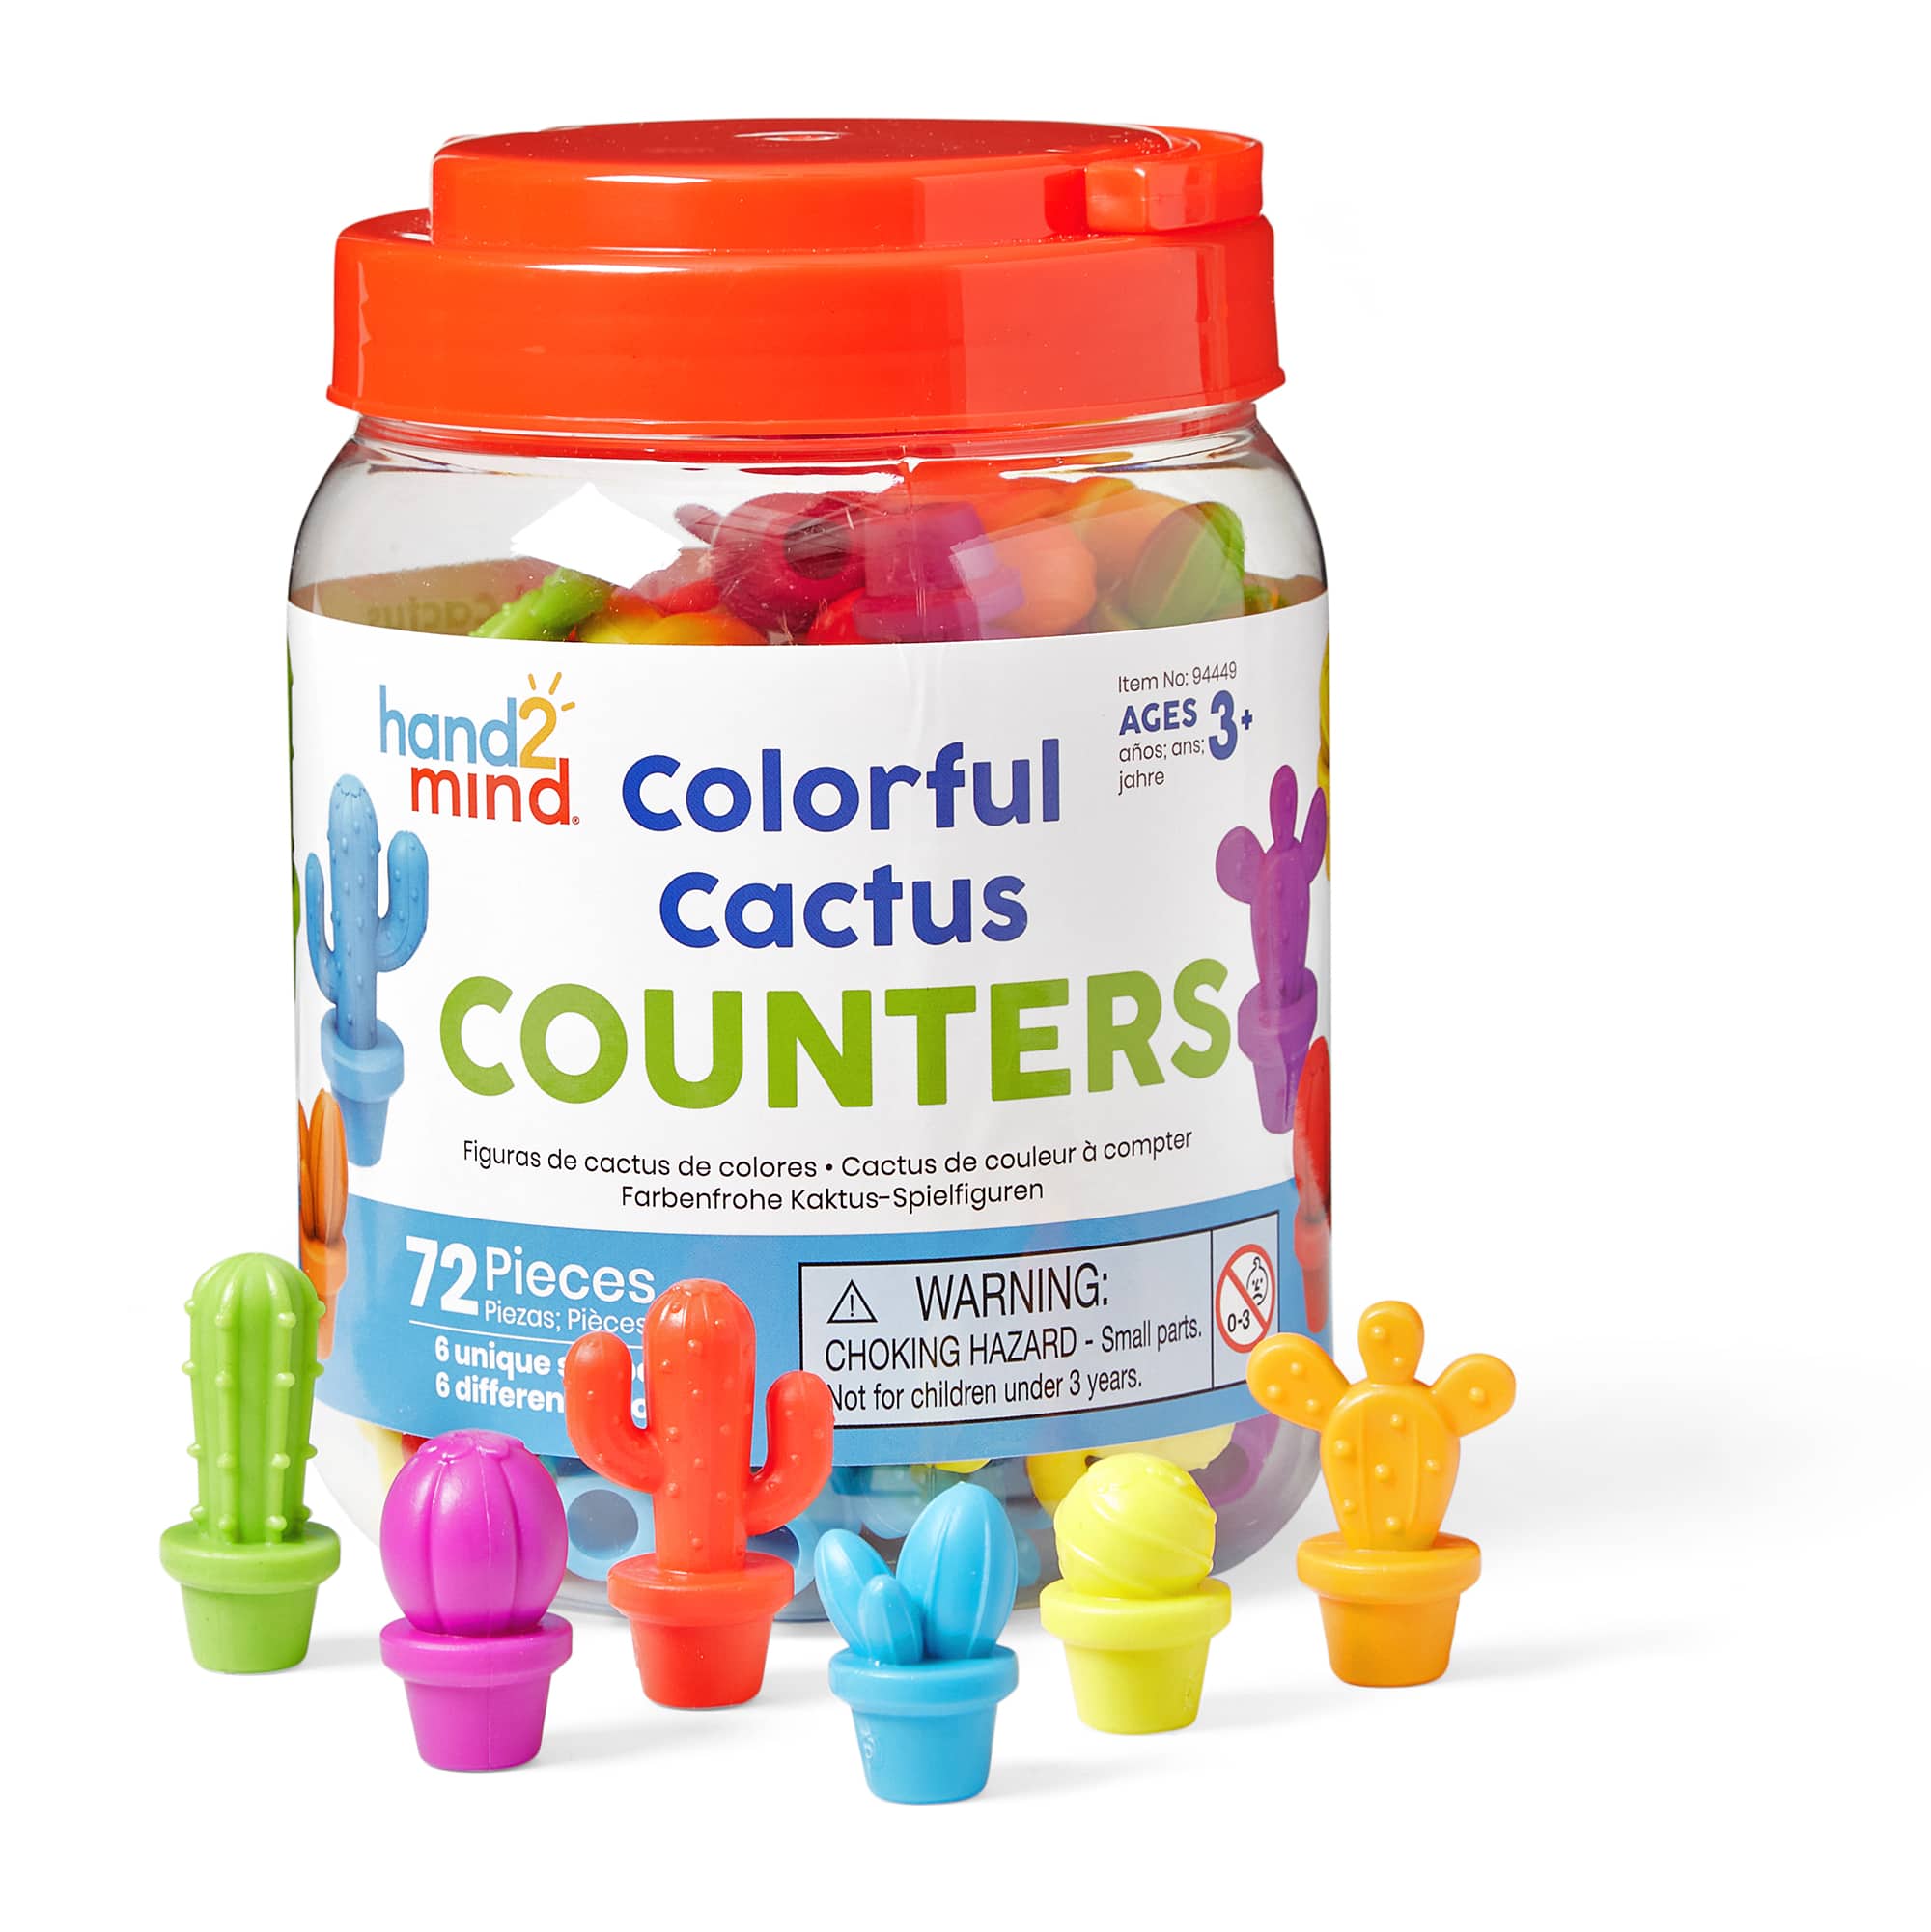 Hand2mind&#xAE; Colorful Cactus Counters